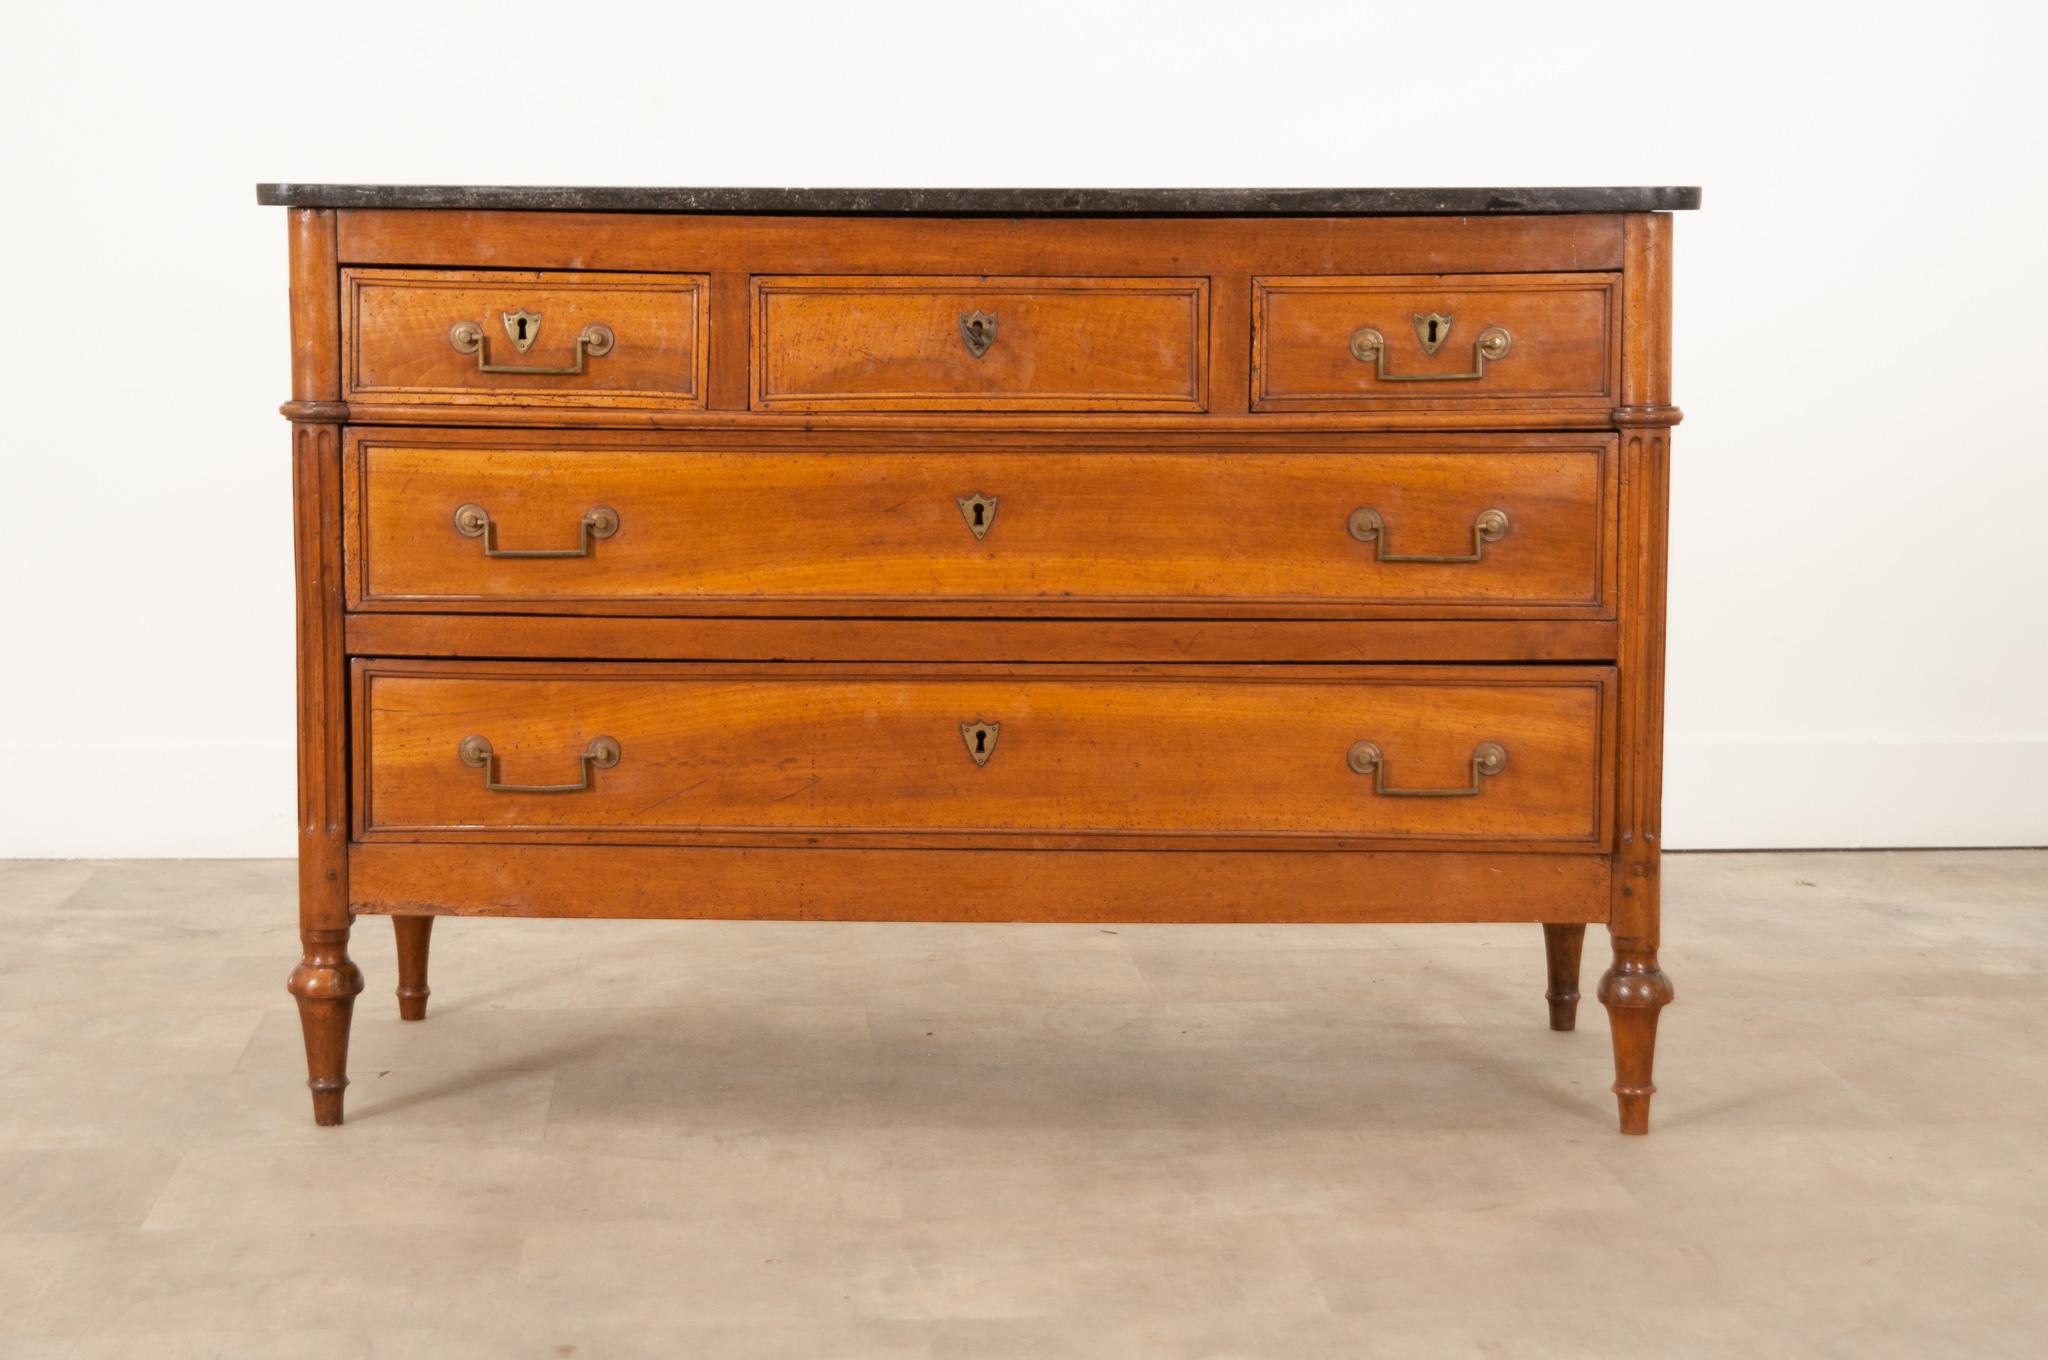 An early 19th Century French Louis XVI style commode made of beautifully toned walnut. Hand-crafted in France circa 1810, its original shaped black marble top has white and gray tiny patterns that resemble the night sky, and it sits over five